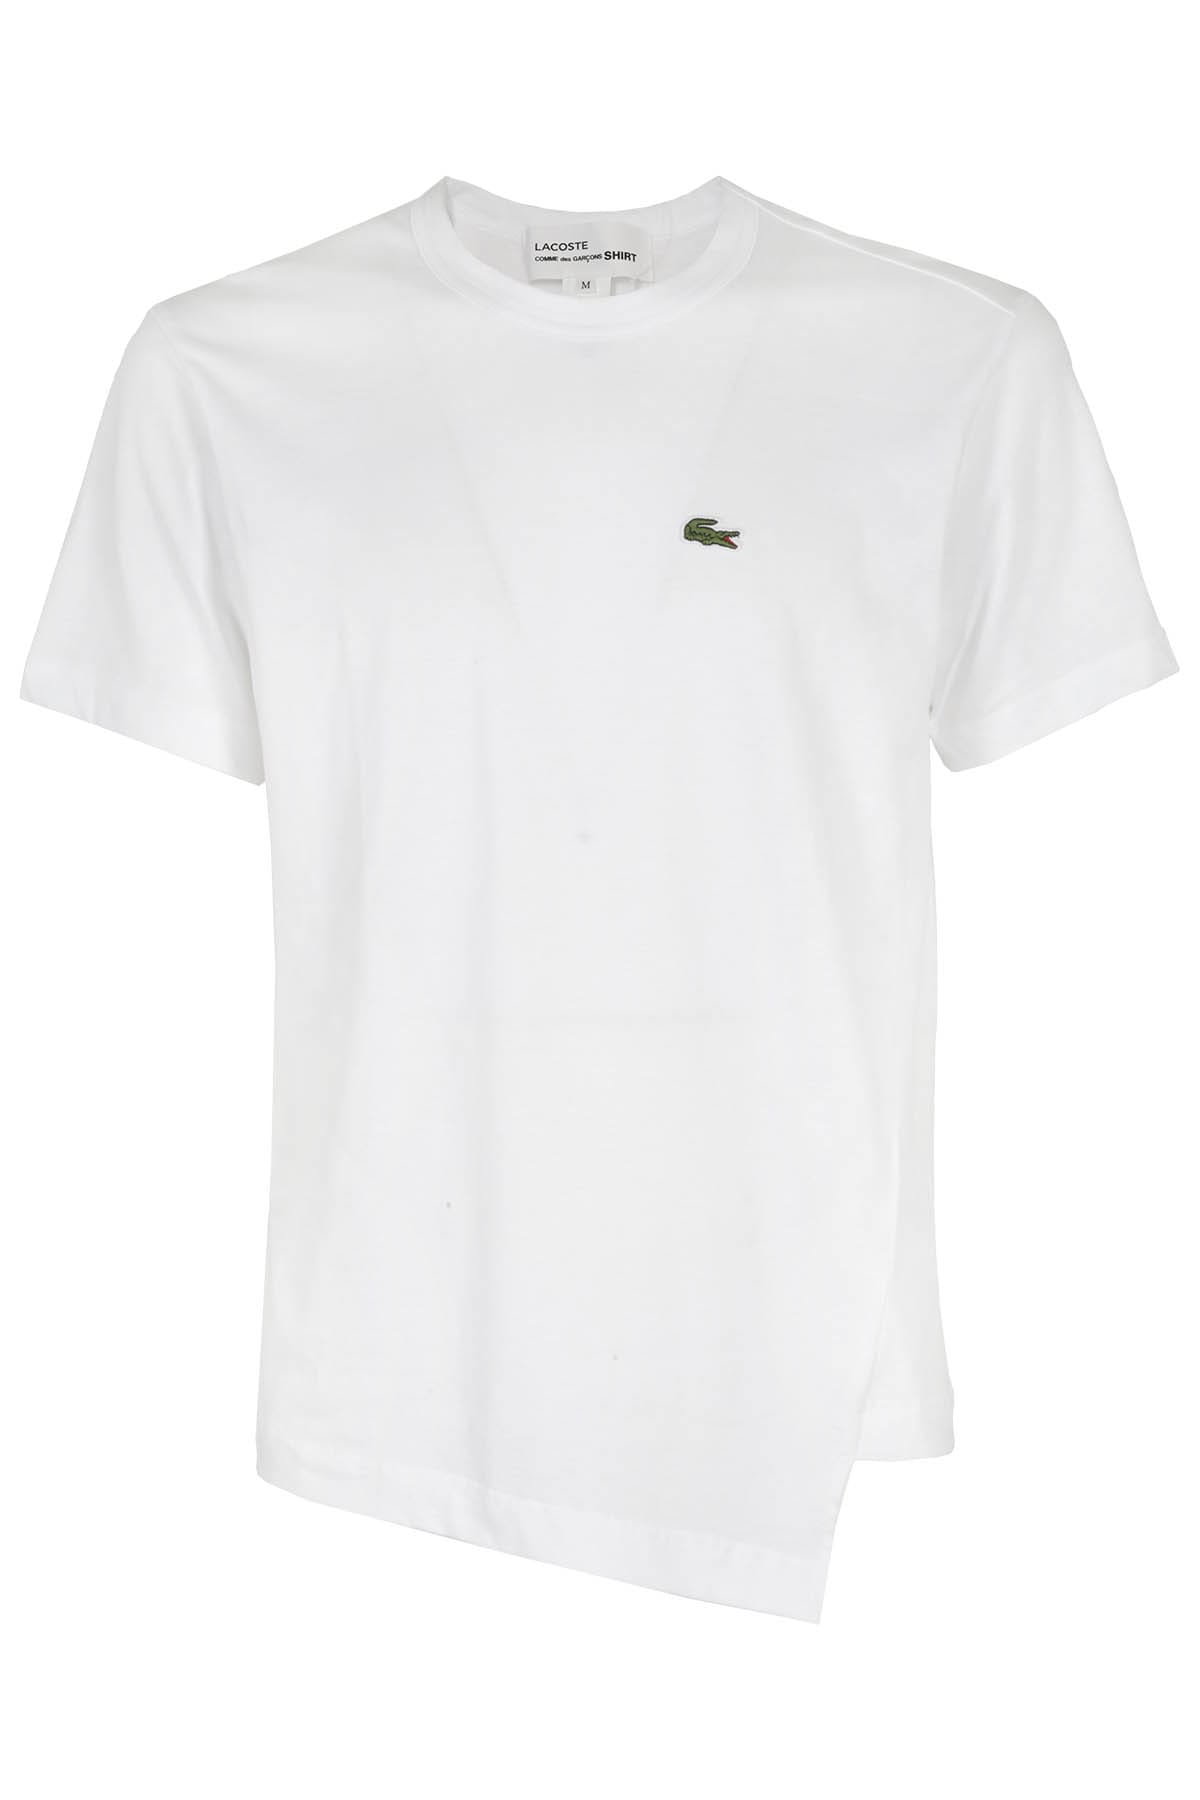 Lacoste Knit In White